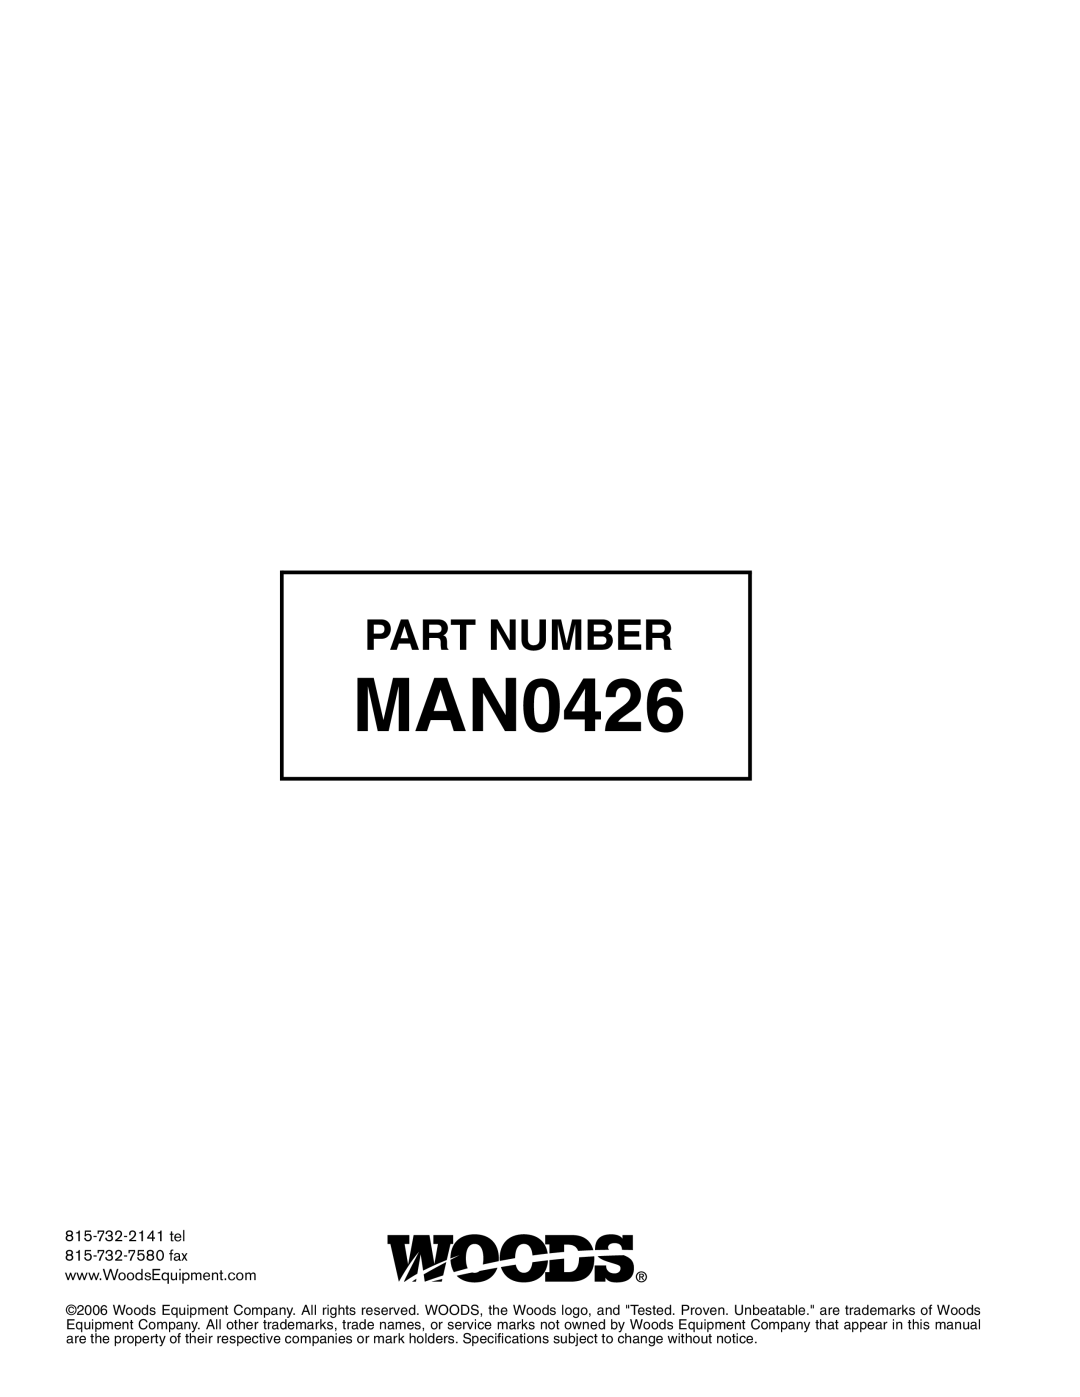 Woods Equipment 211716 installation manual MAN0426, Part Number 